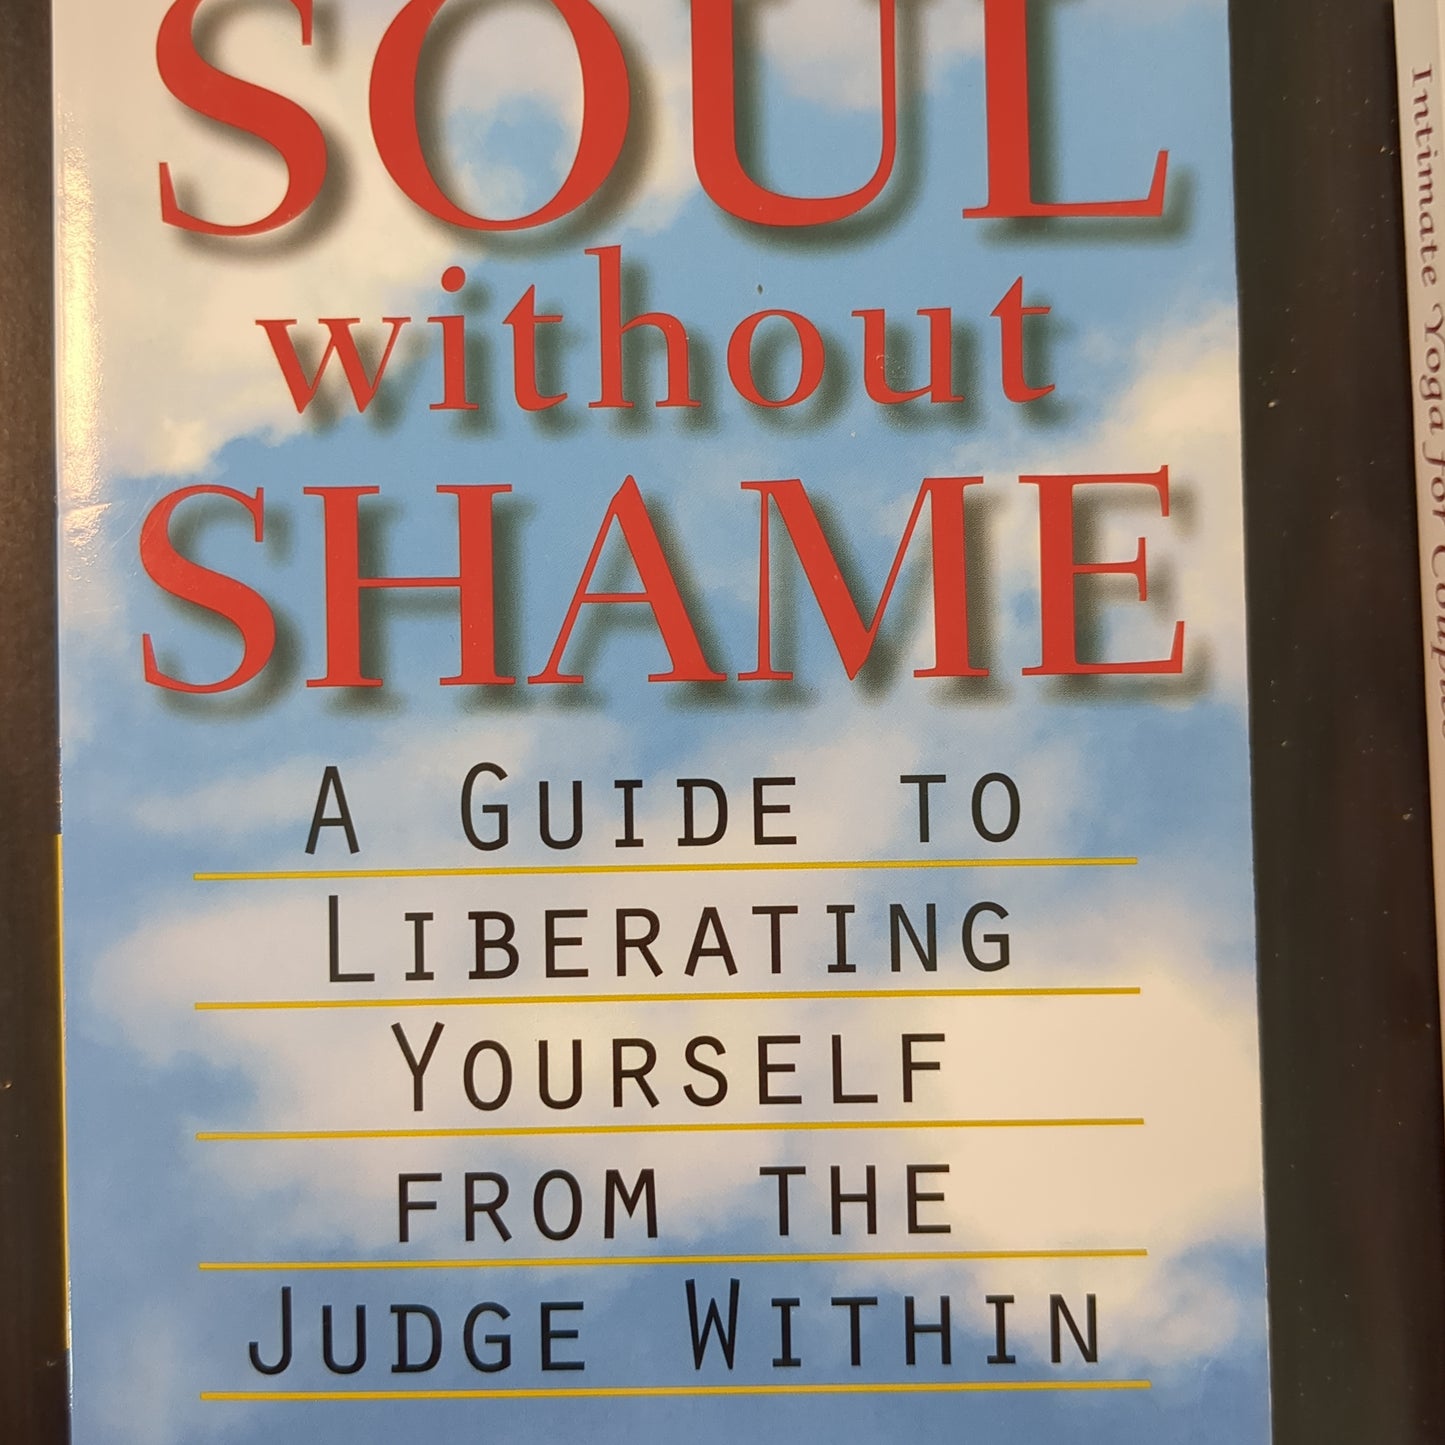 Soul without shame a guy to liberating yourself from the judge within